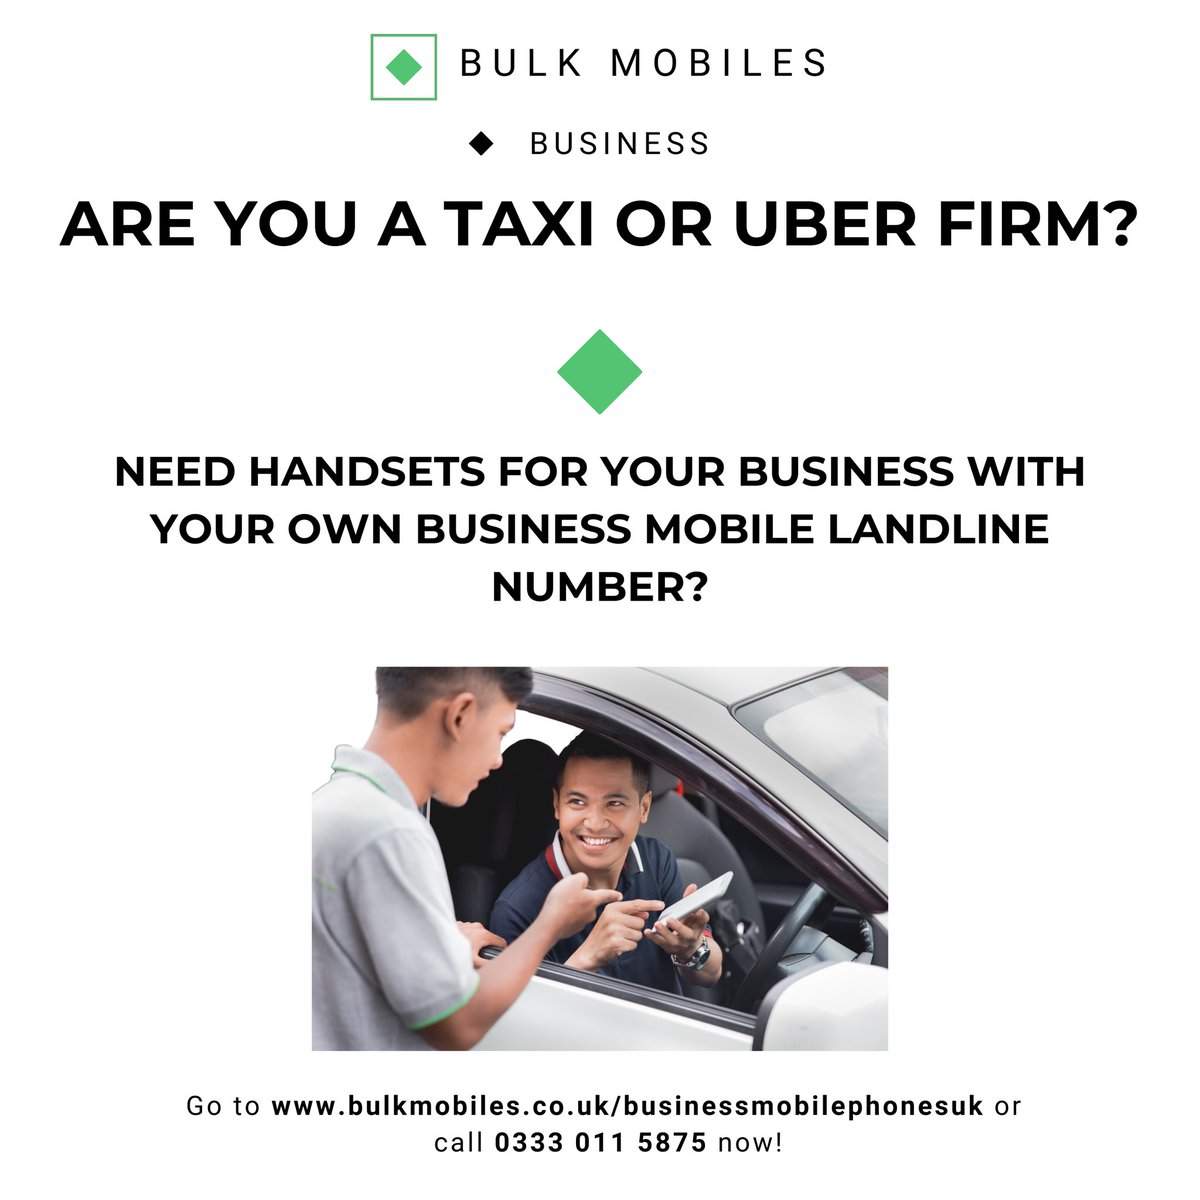 Calling all taxi or Uber firms! 🚖 Need discounted tailored handsets for your business? 📱

Explore now at bulkmobiles.co.uk/businessmobile… 📞📲 

#BulkMobiles #TaxiBusiness #UberFirm #BusinessHandsets #CommunicationUpgrade